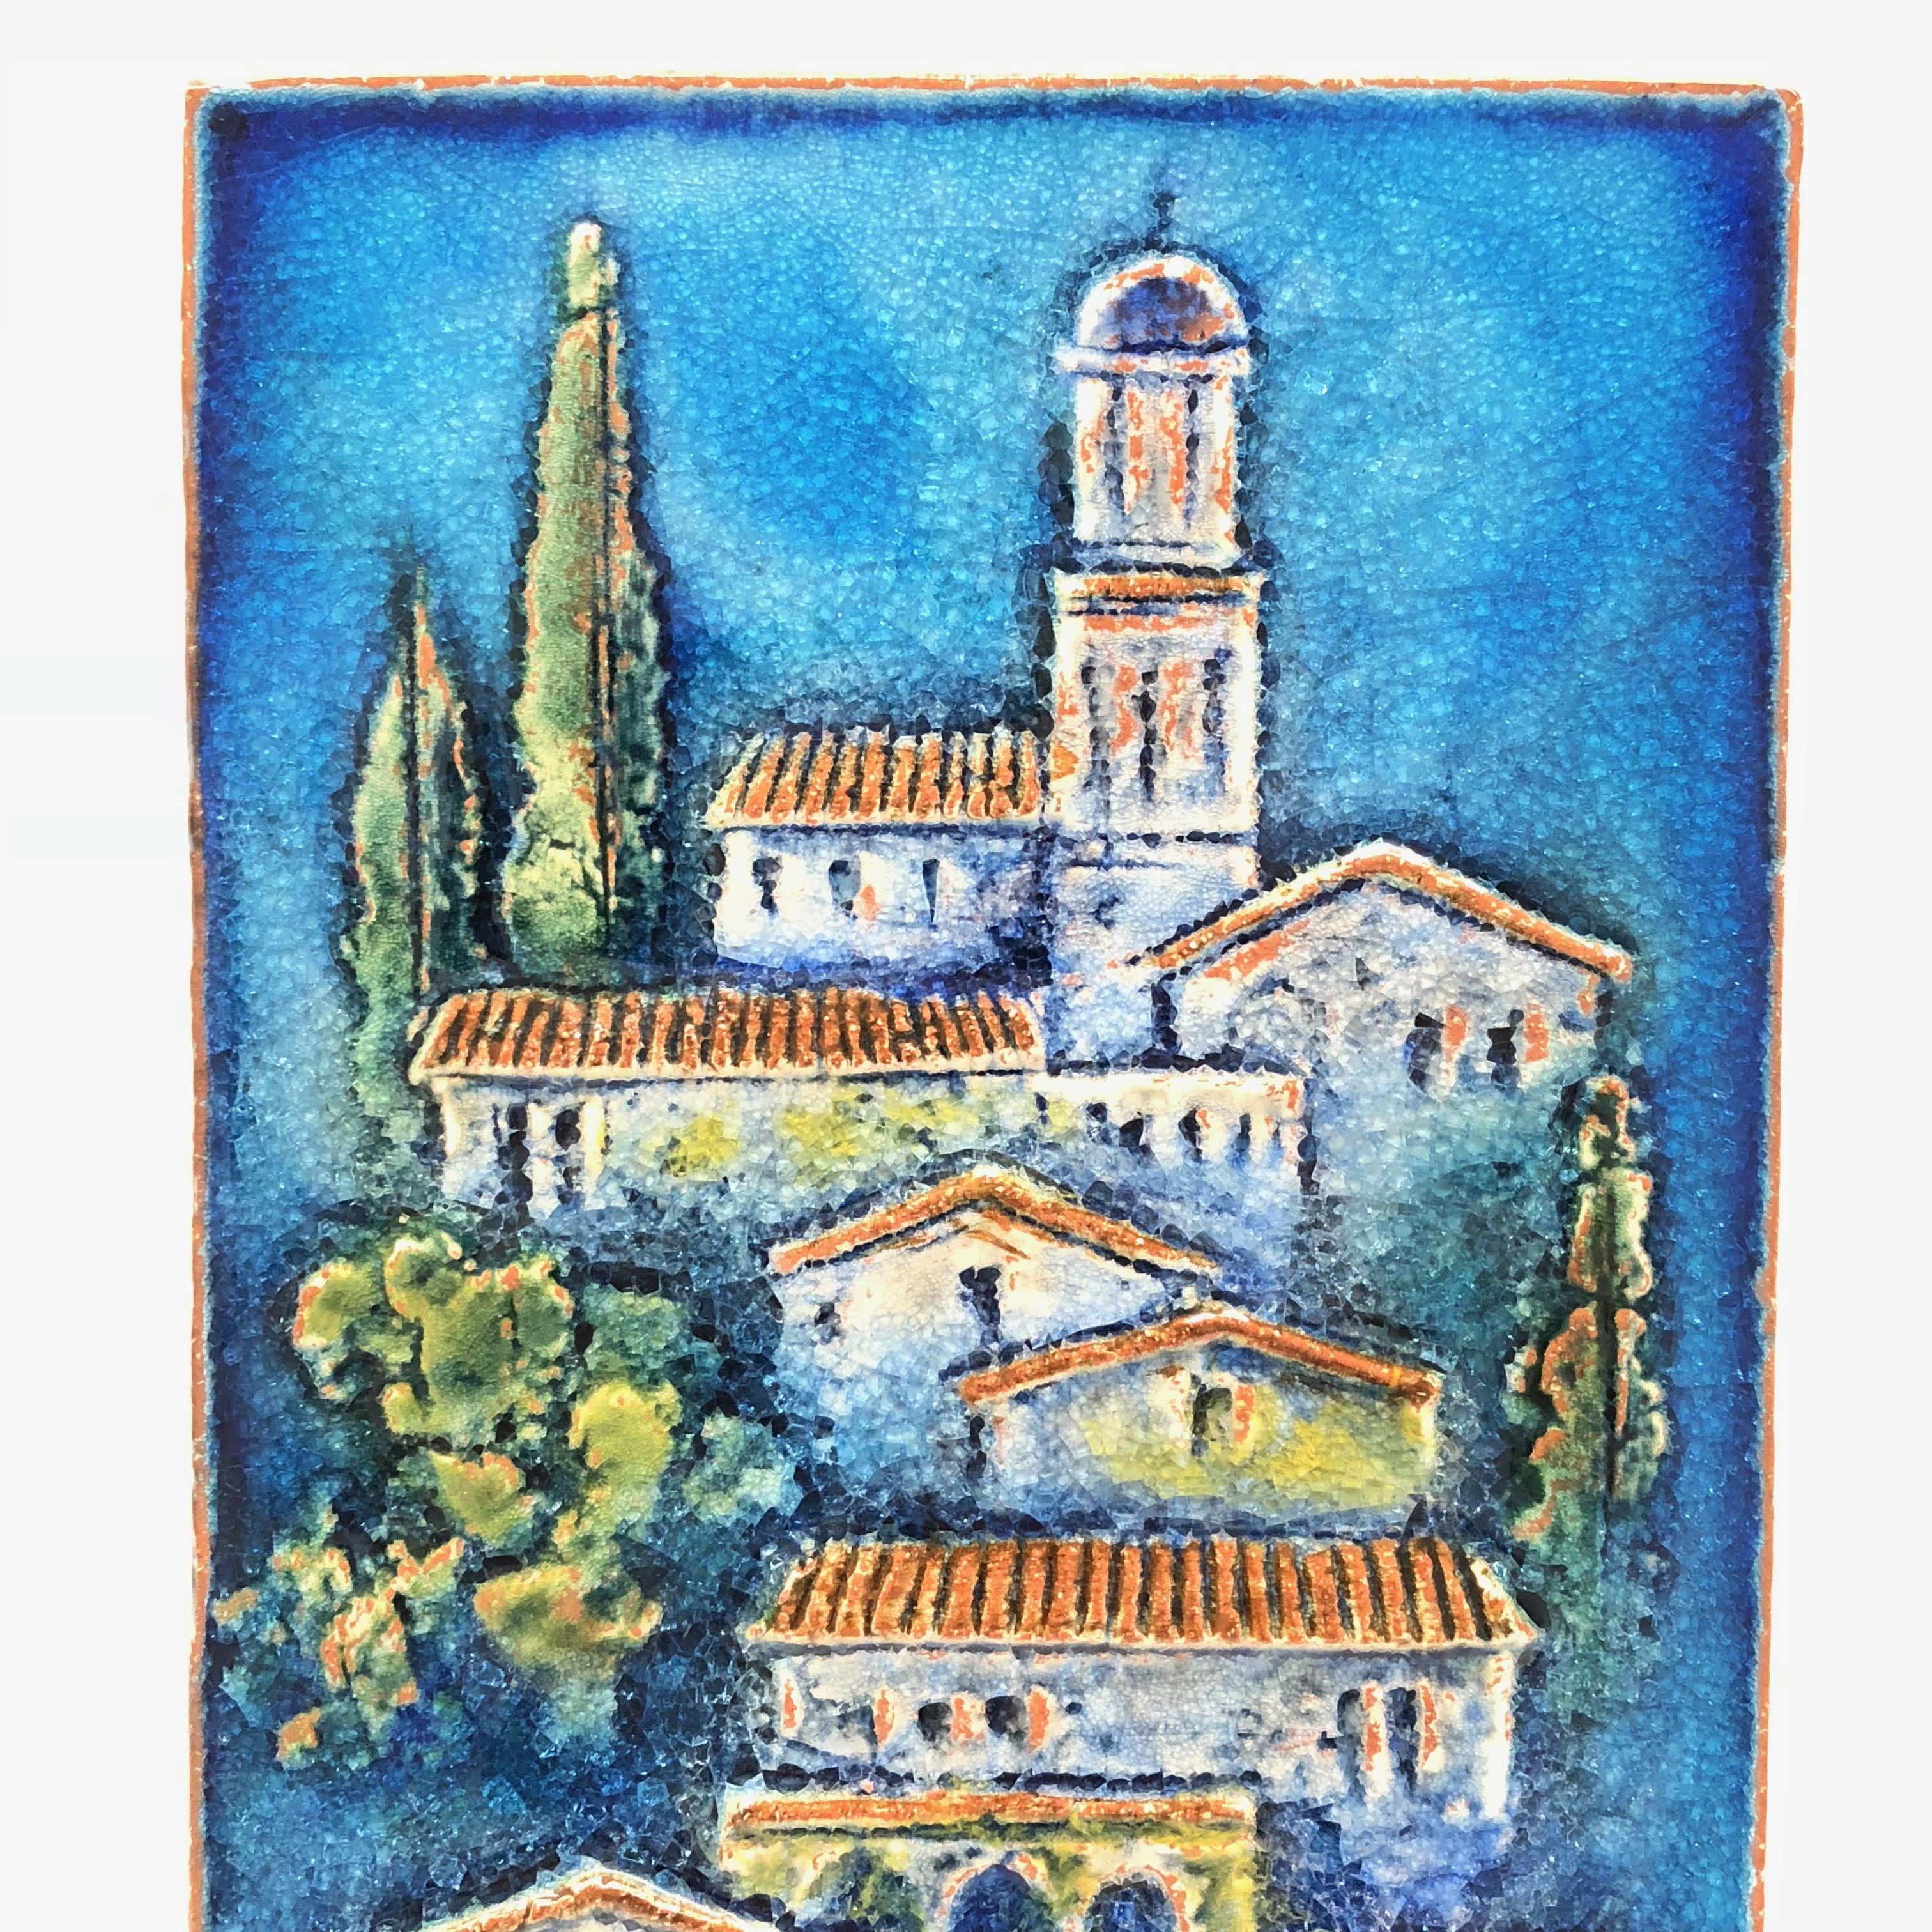 A beautiful, German glazed terra cotta or Majolica landscape tile by Karlsruhe, circa 1970. This gorgeous wall art depicts a Tuscany Village. Well detailed and beautiful colors.